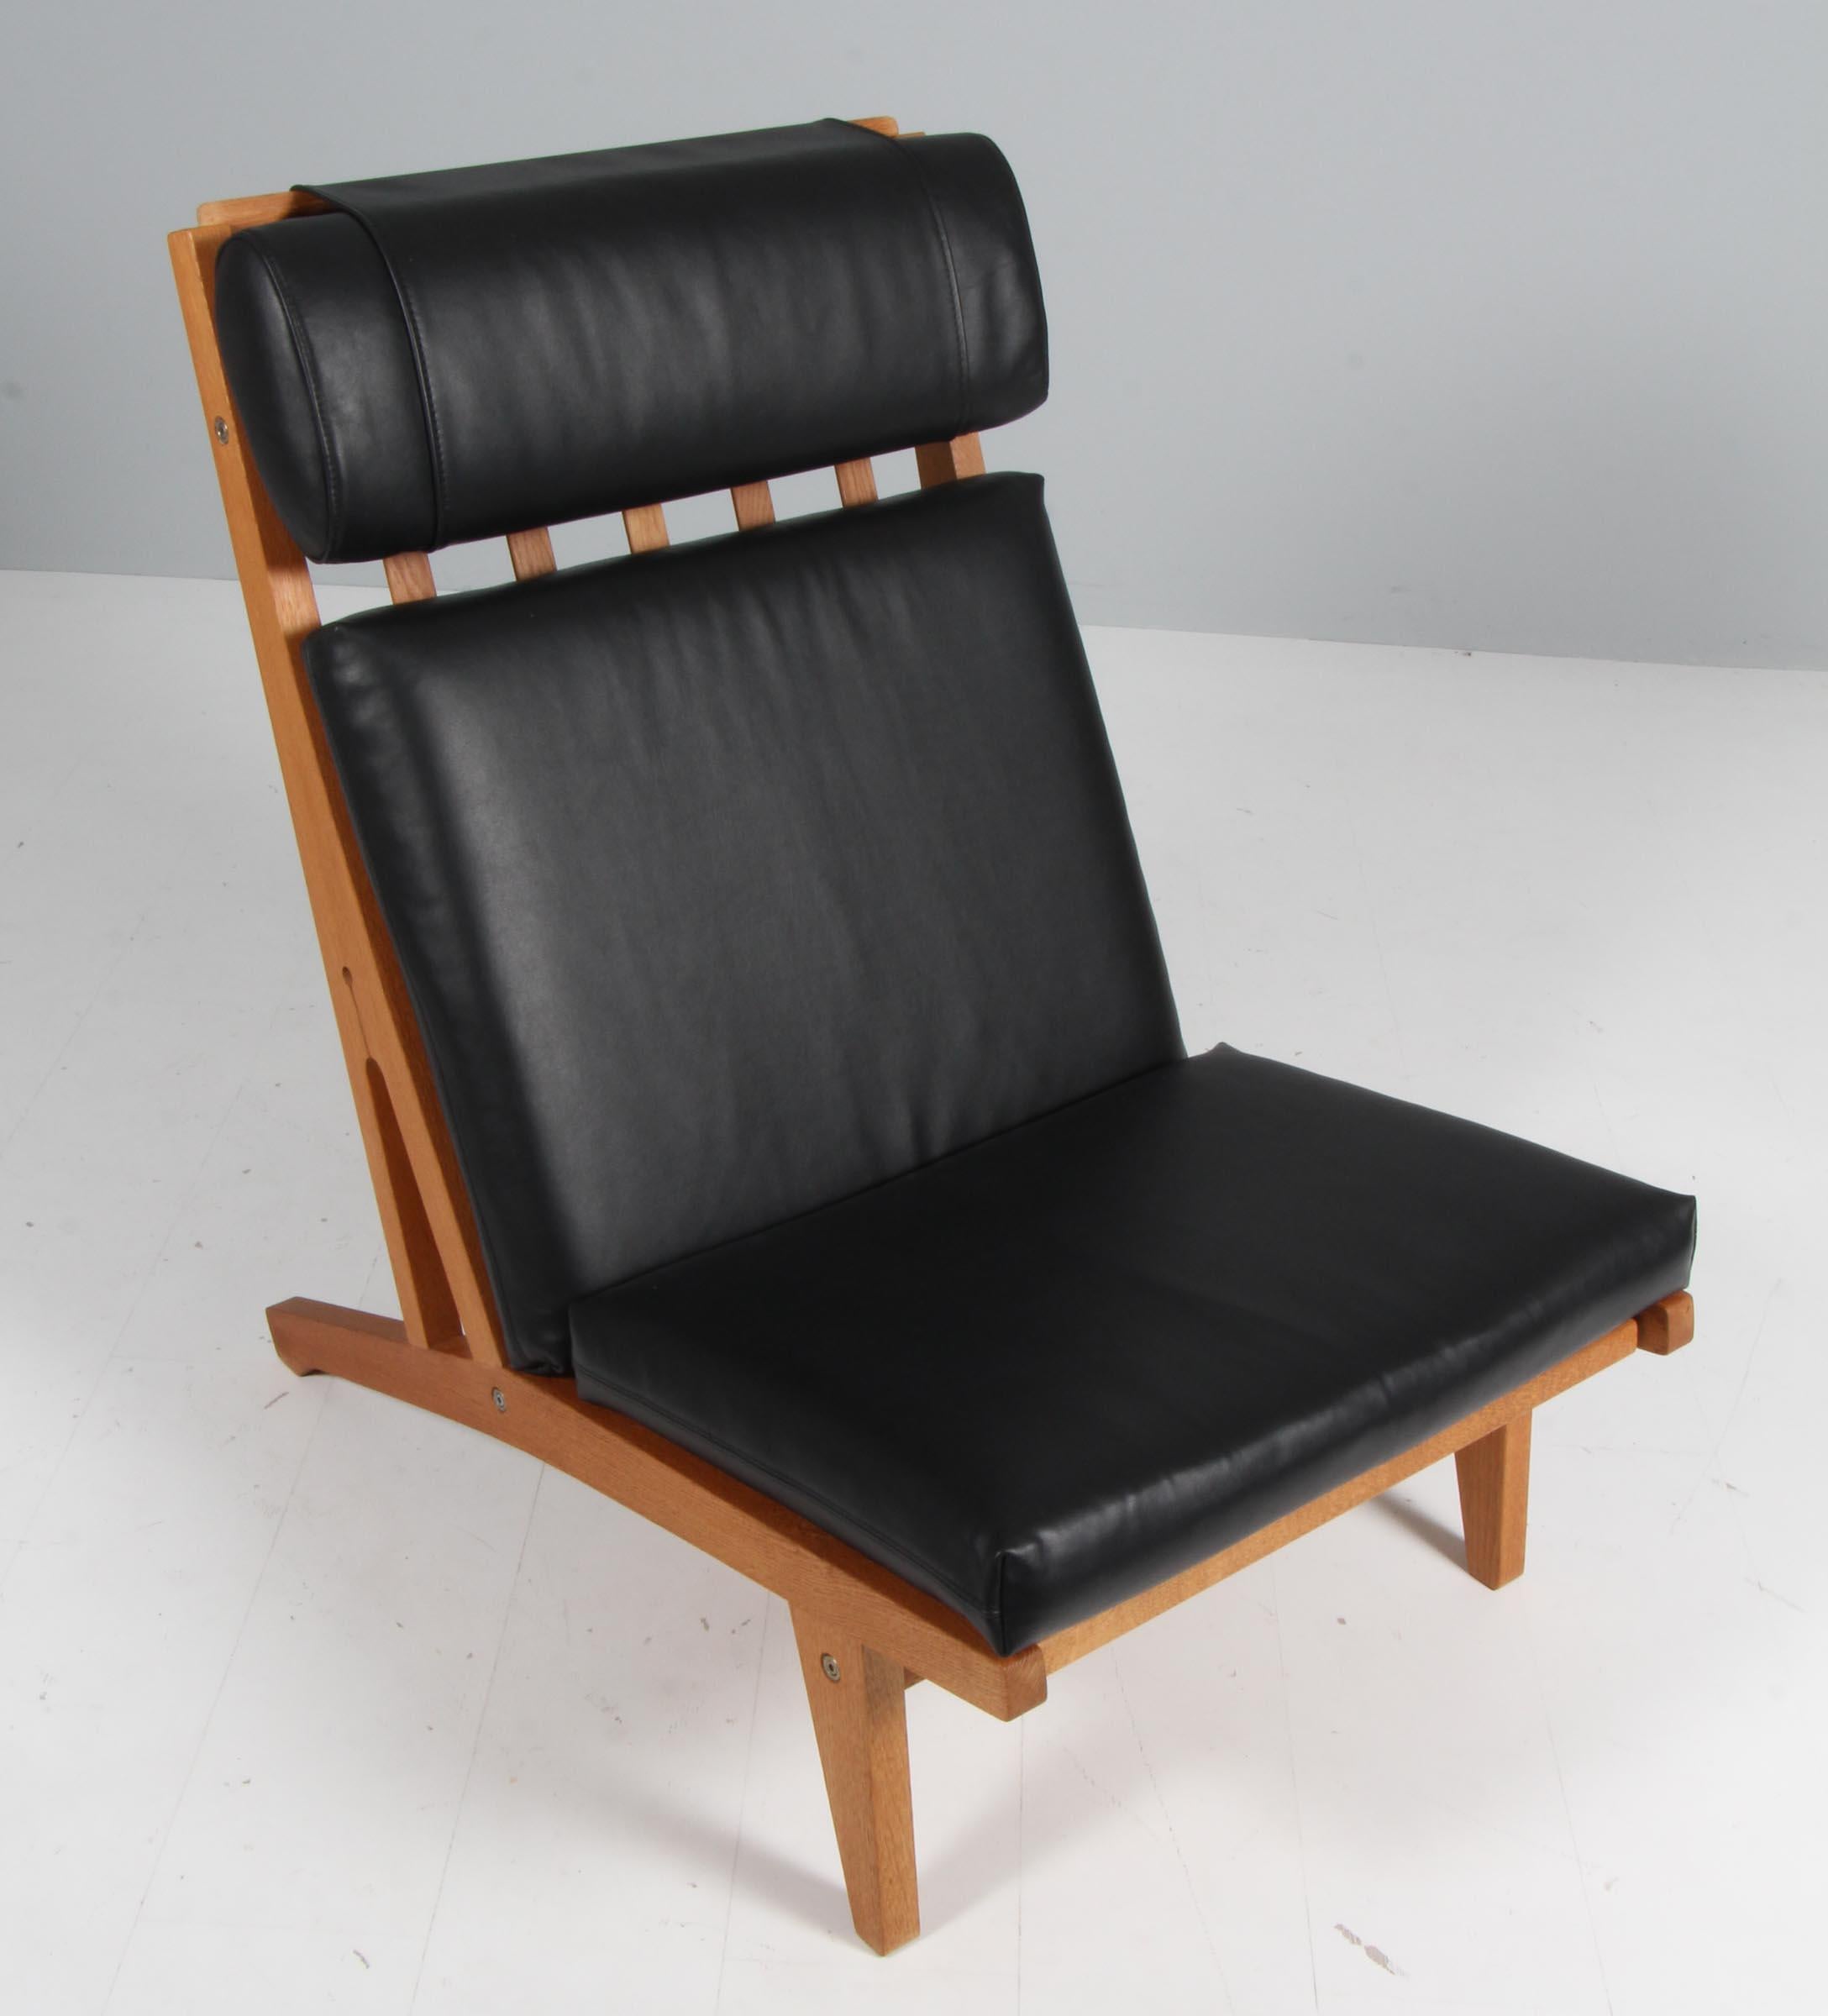 Hans J. Wegner lounge chair with loose cushions new upholstered with black pure full grain aniline leather.

Frame of oak.

Model GE-375, made by GETAMA.